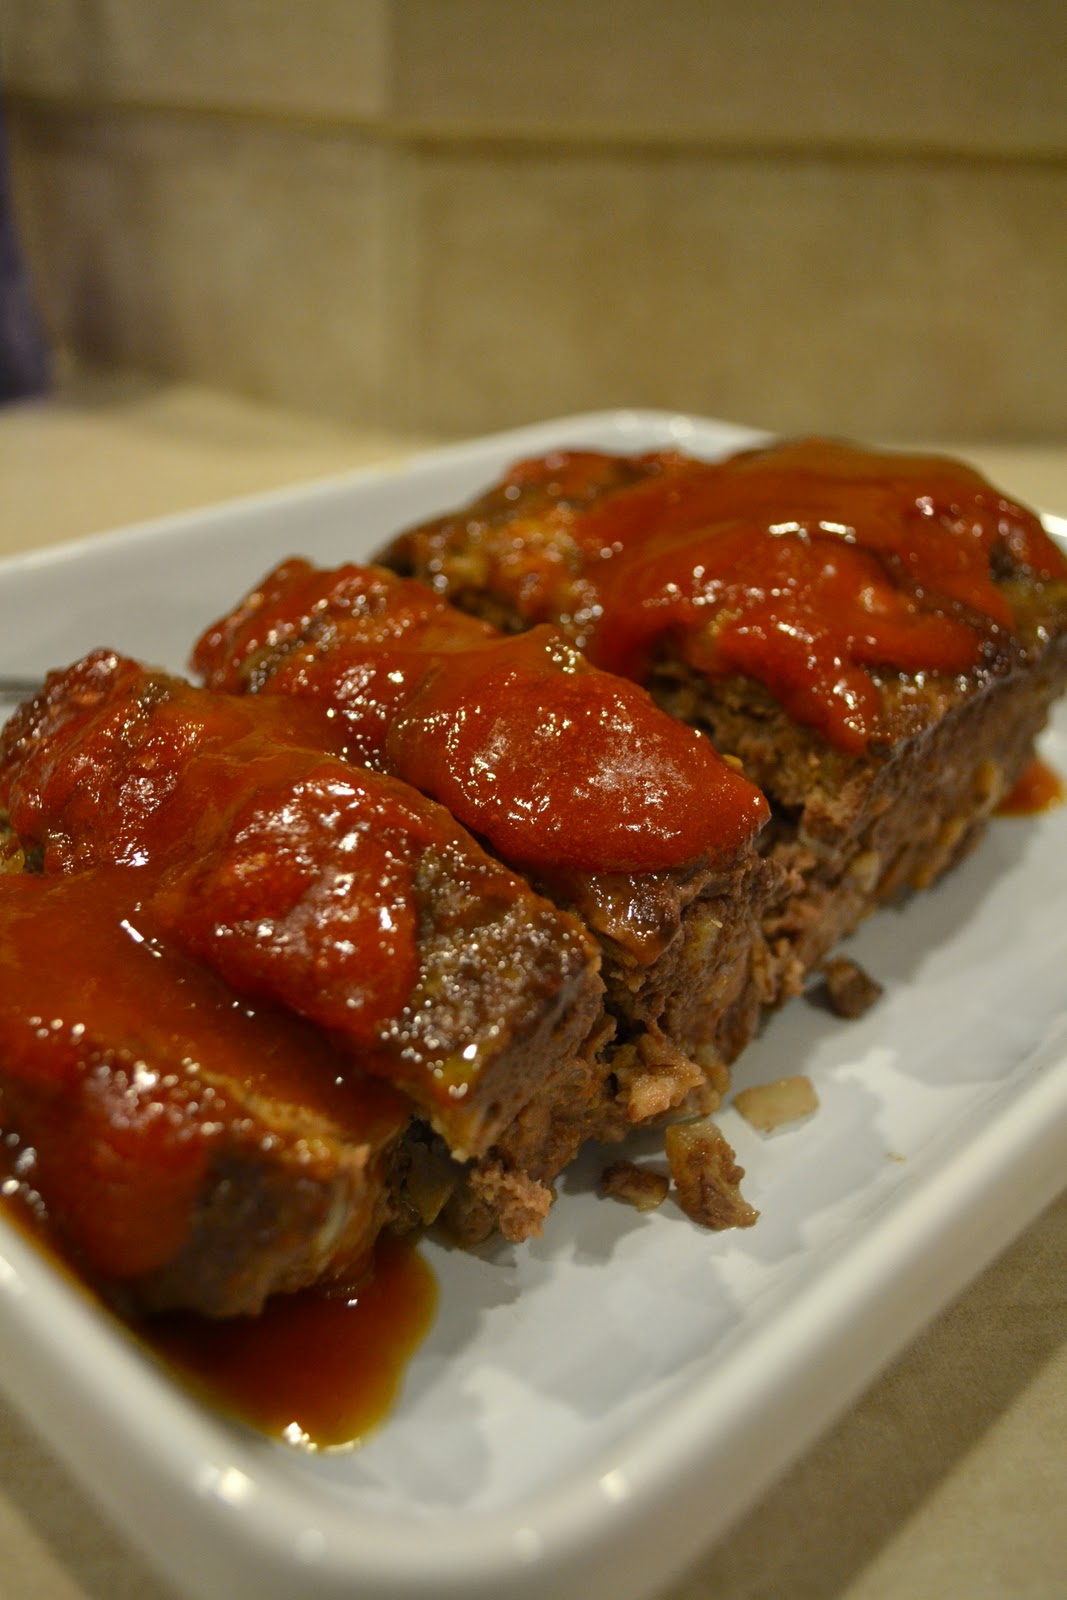 What's For Dinner? Comfort Food! Meatloaf! - A Pretty Life In The Suburbs